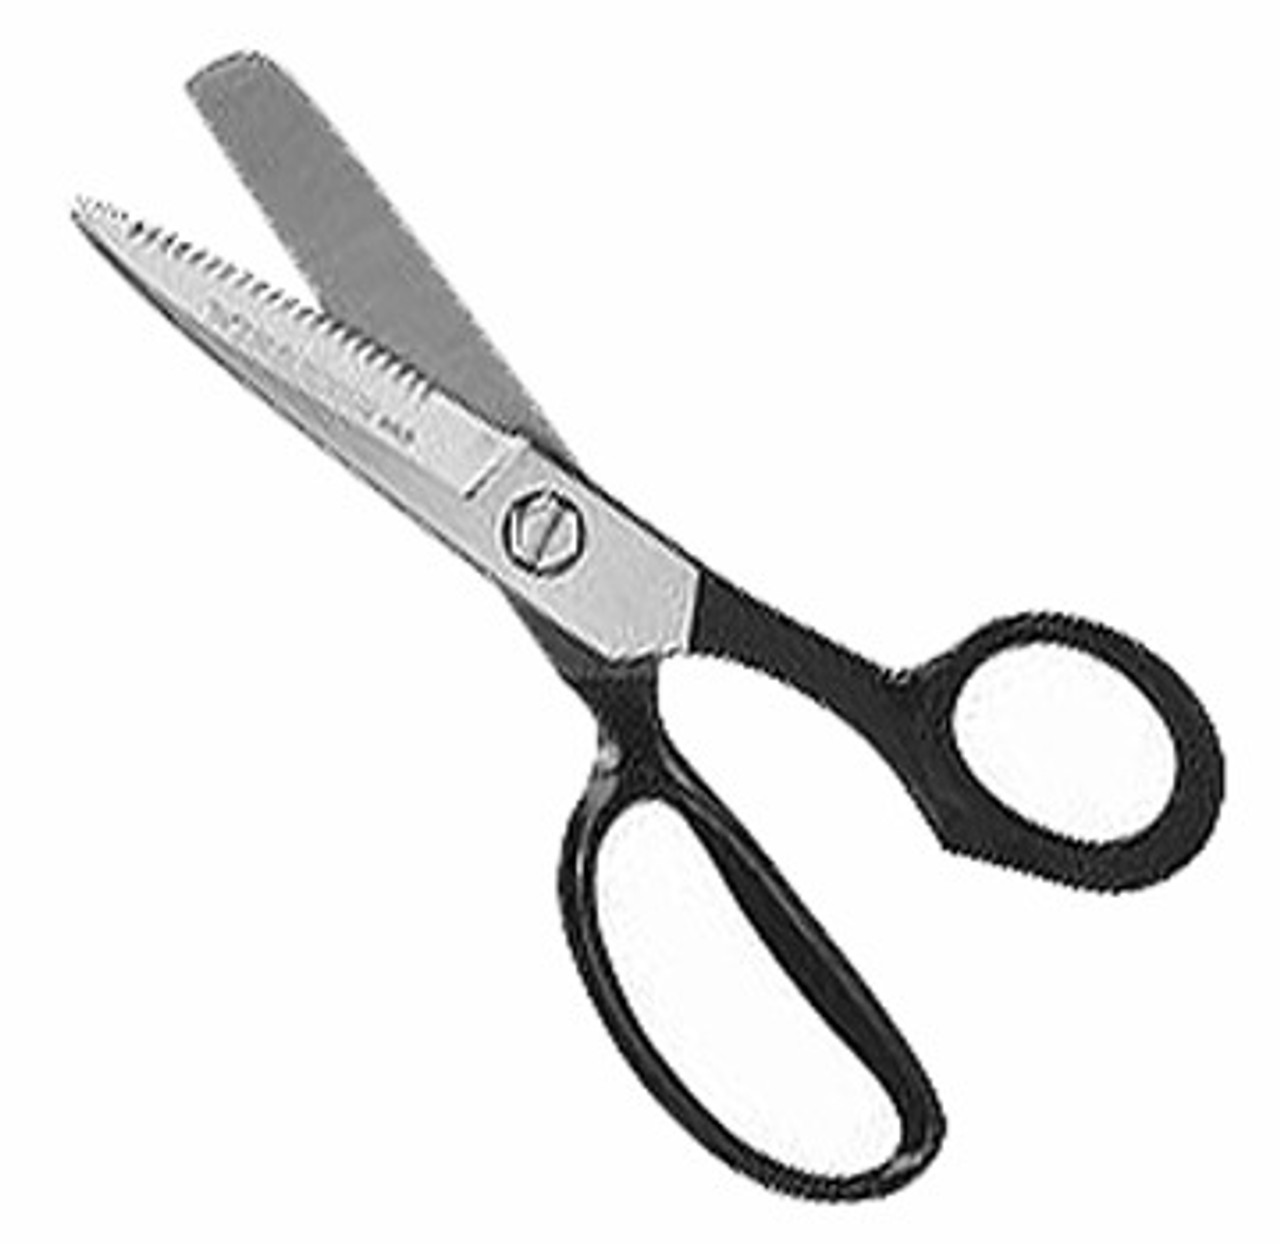 Wiss #8-BLT Leather and Belt Cutting Shears 8 1/4